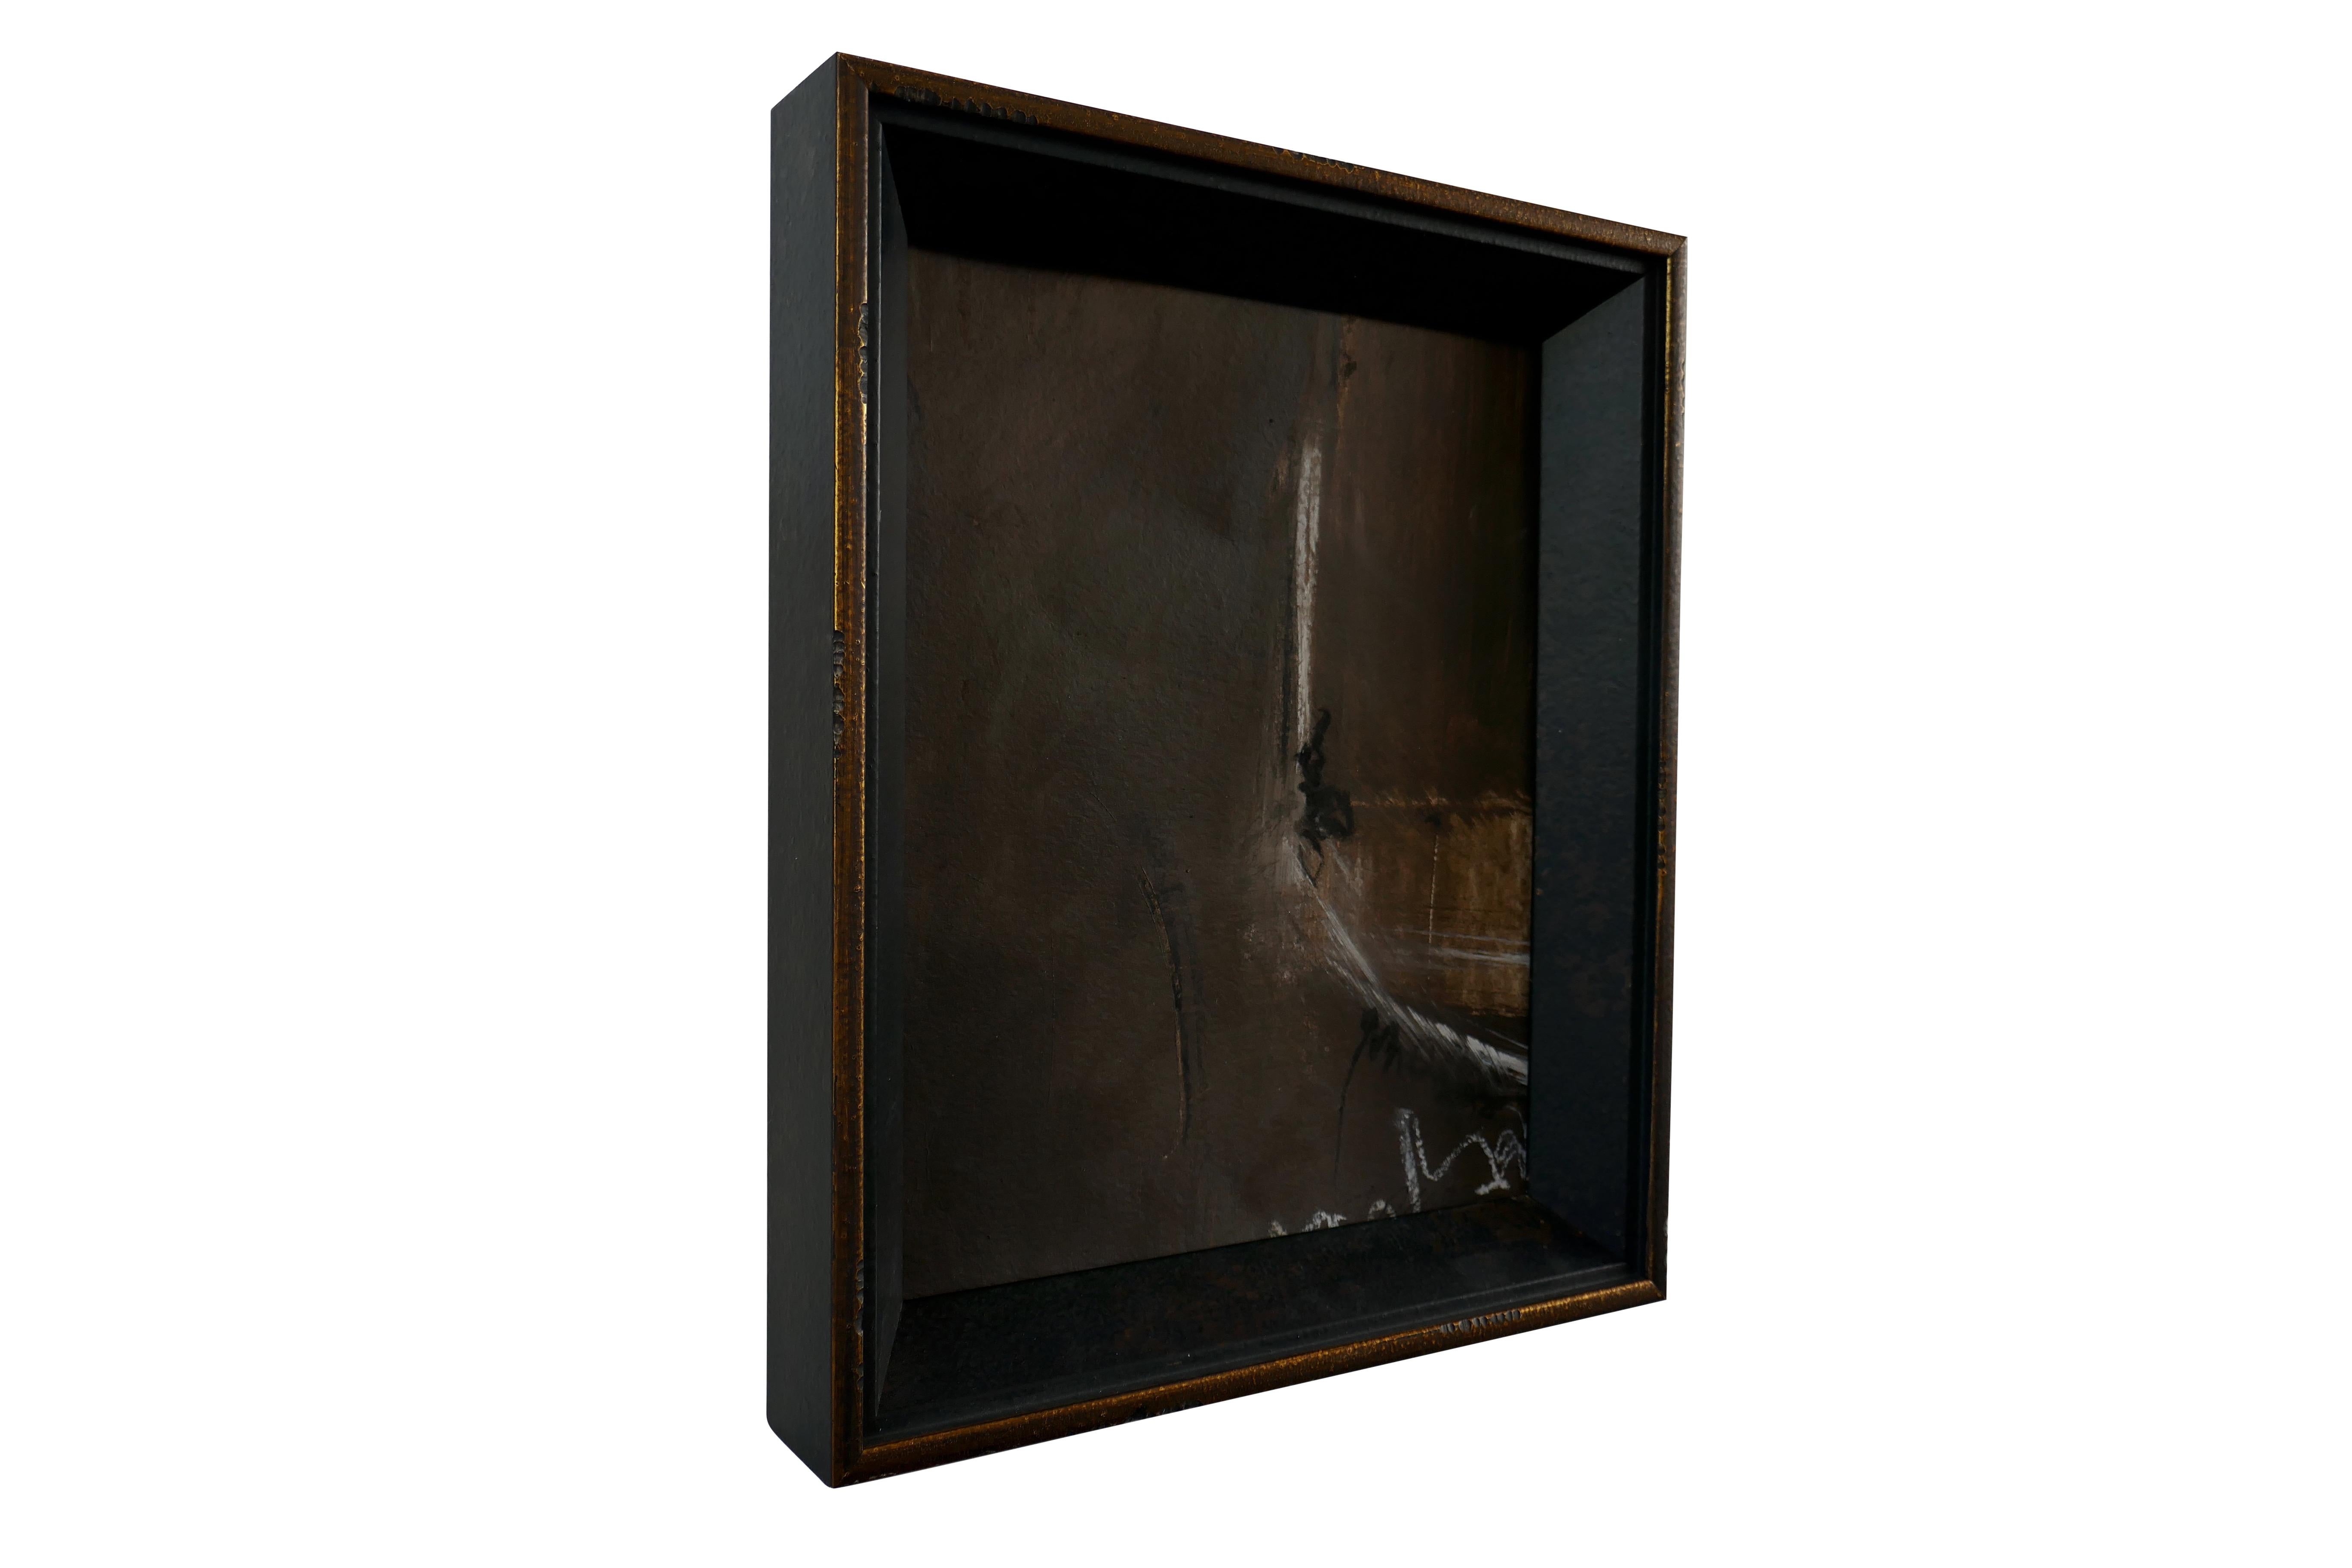 Original one-of-one hand created & signed art piece by Tammy Price. Premium solid wood glass encased frame in matte black with gold tone detailing. Multi shades predominantly of earthy terrain brown's. Mediums of acrylic, ink and charcoal. Comes